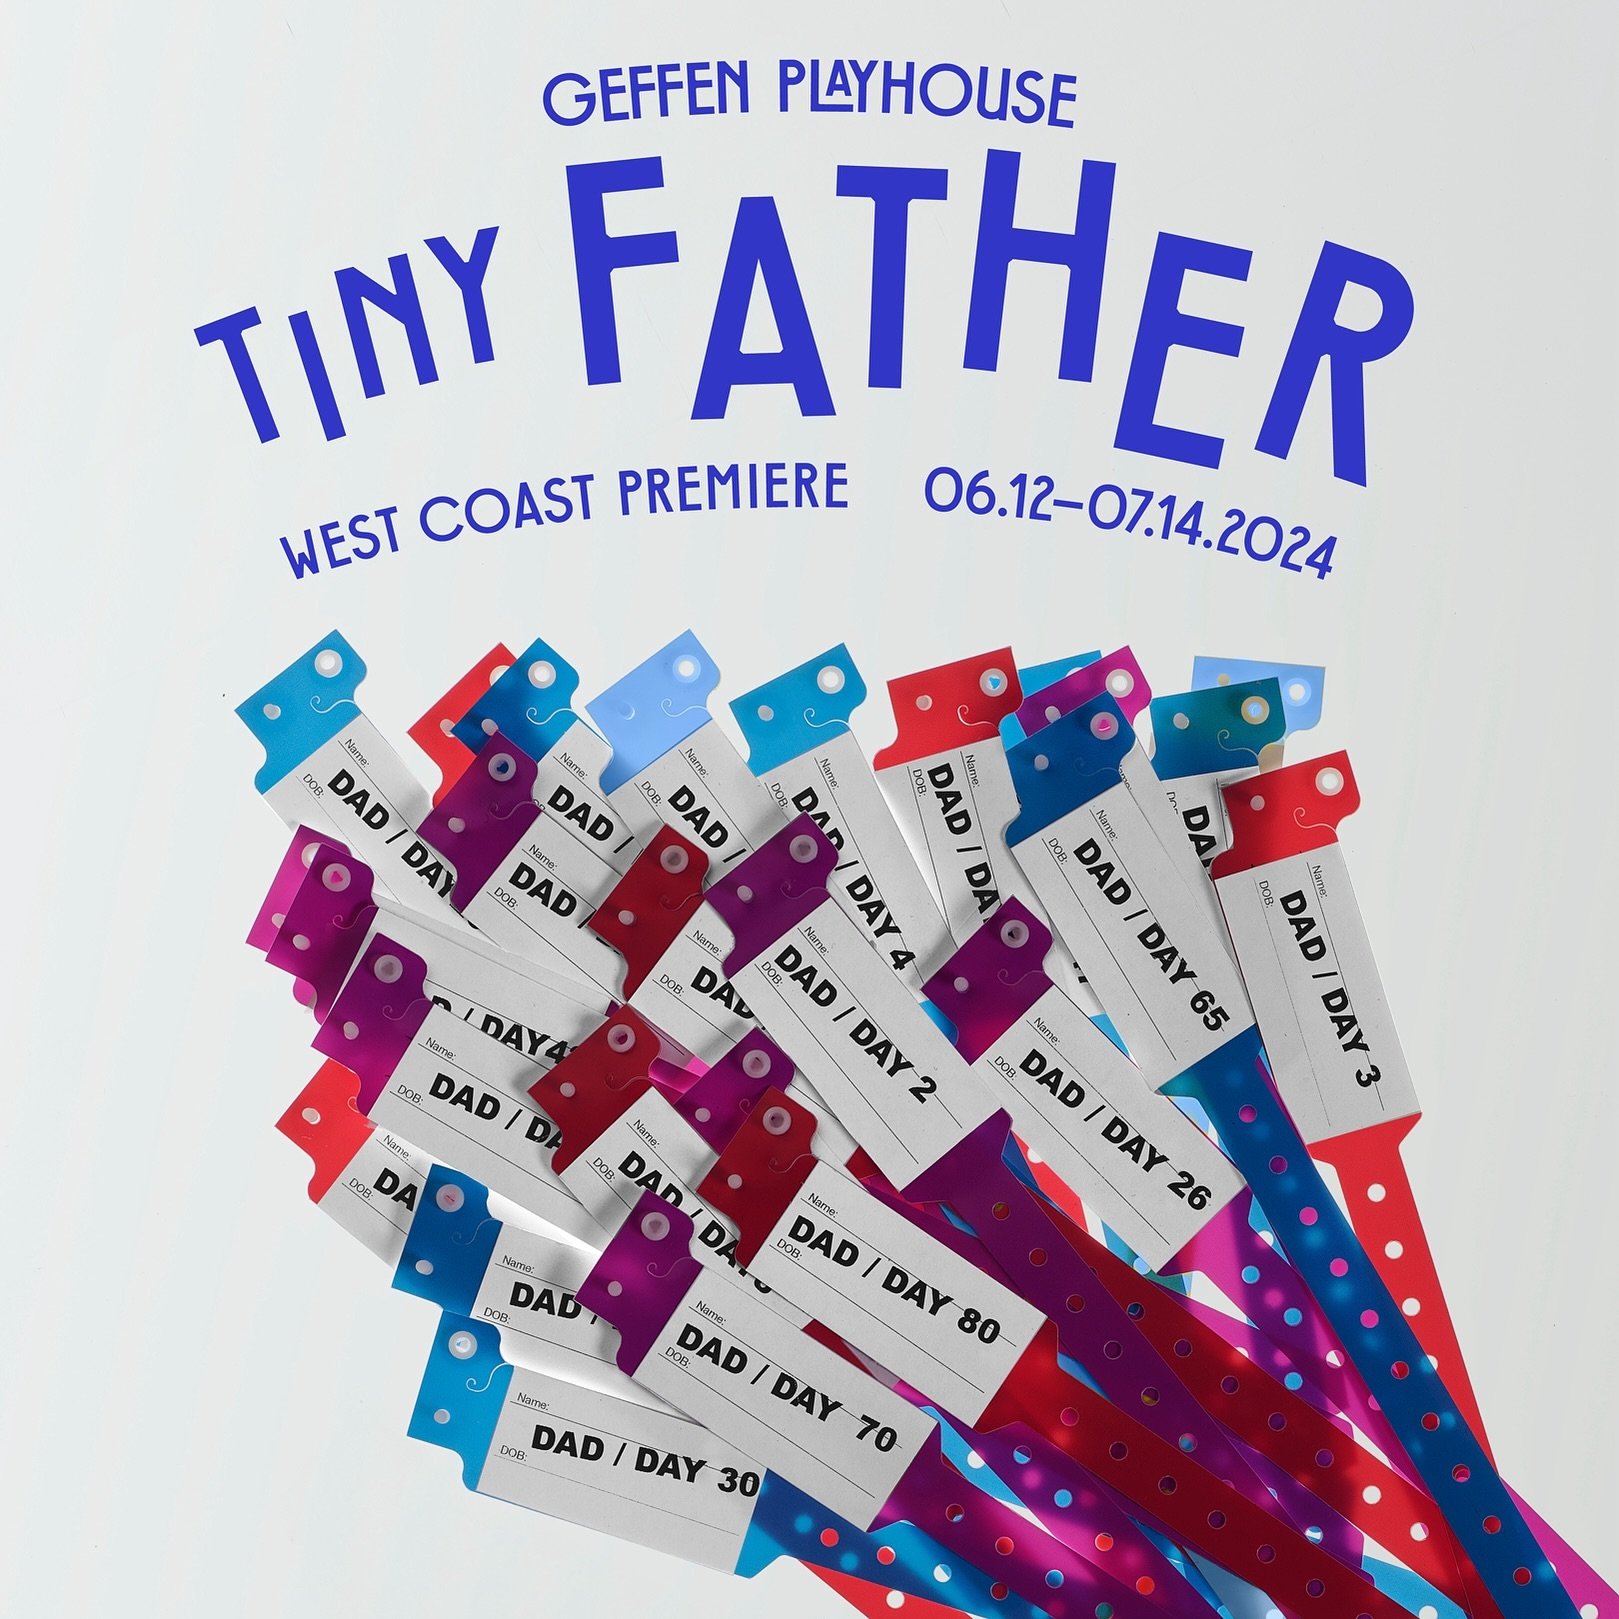 From Our #ArtsPartner @geffenplayhouse: When a &ldquo;friends with benefits&rdquo; relationship unexpectedly results in the early arrival of a baby girl, Daniel must choose between being a biological parent or becoming a father. With the help of a no